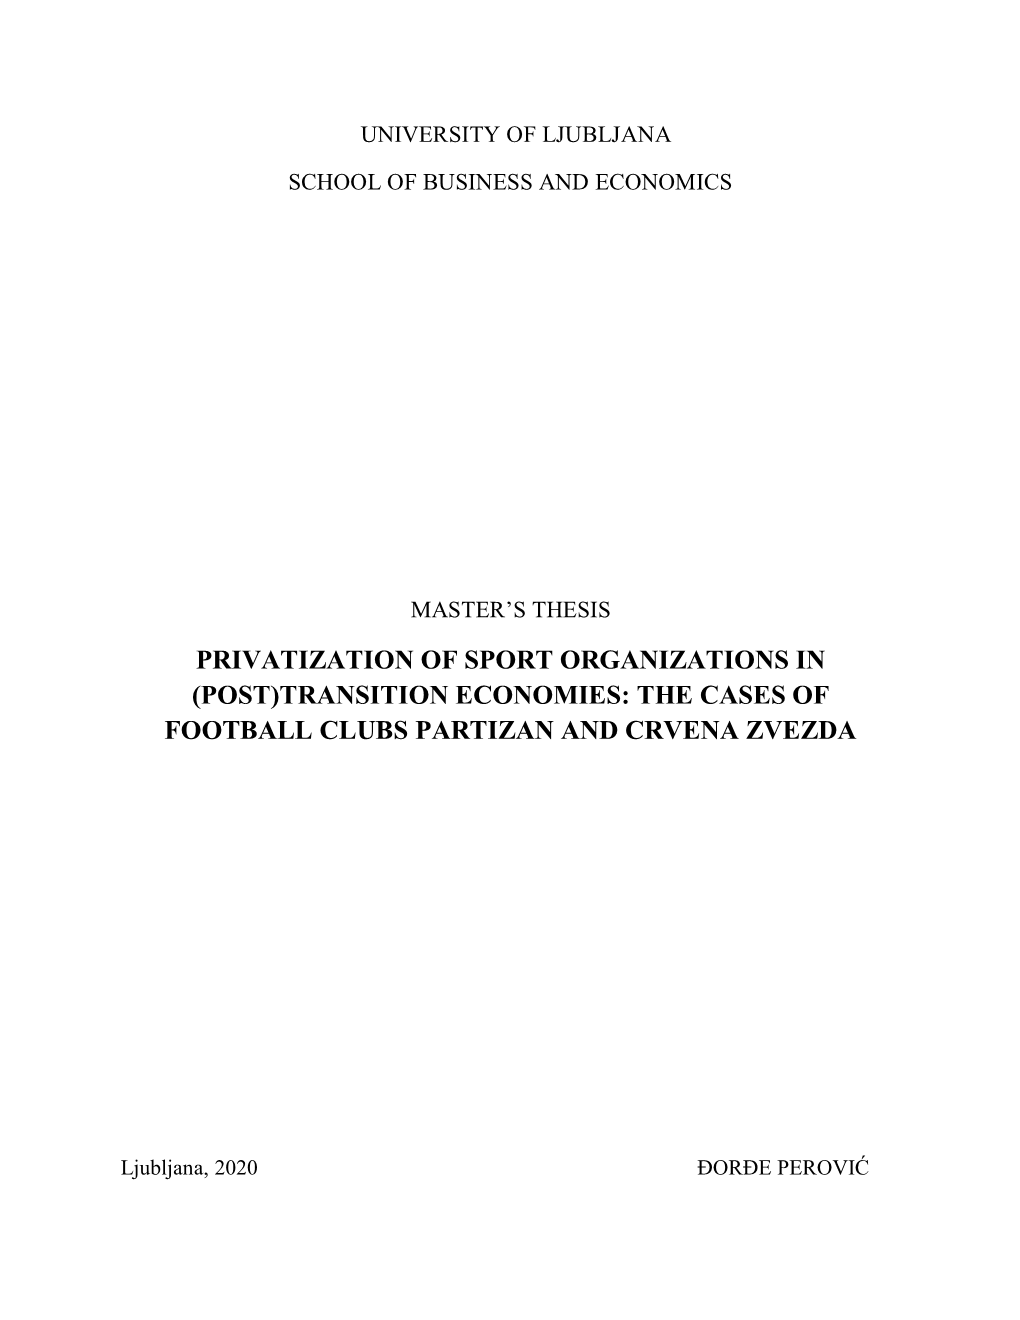 Privatization of Sport Organizations in (Post)Transition Economies: the Cases of Football Clubs Partizan and Crvena Zvezda